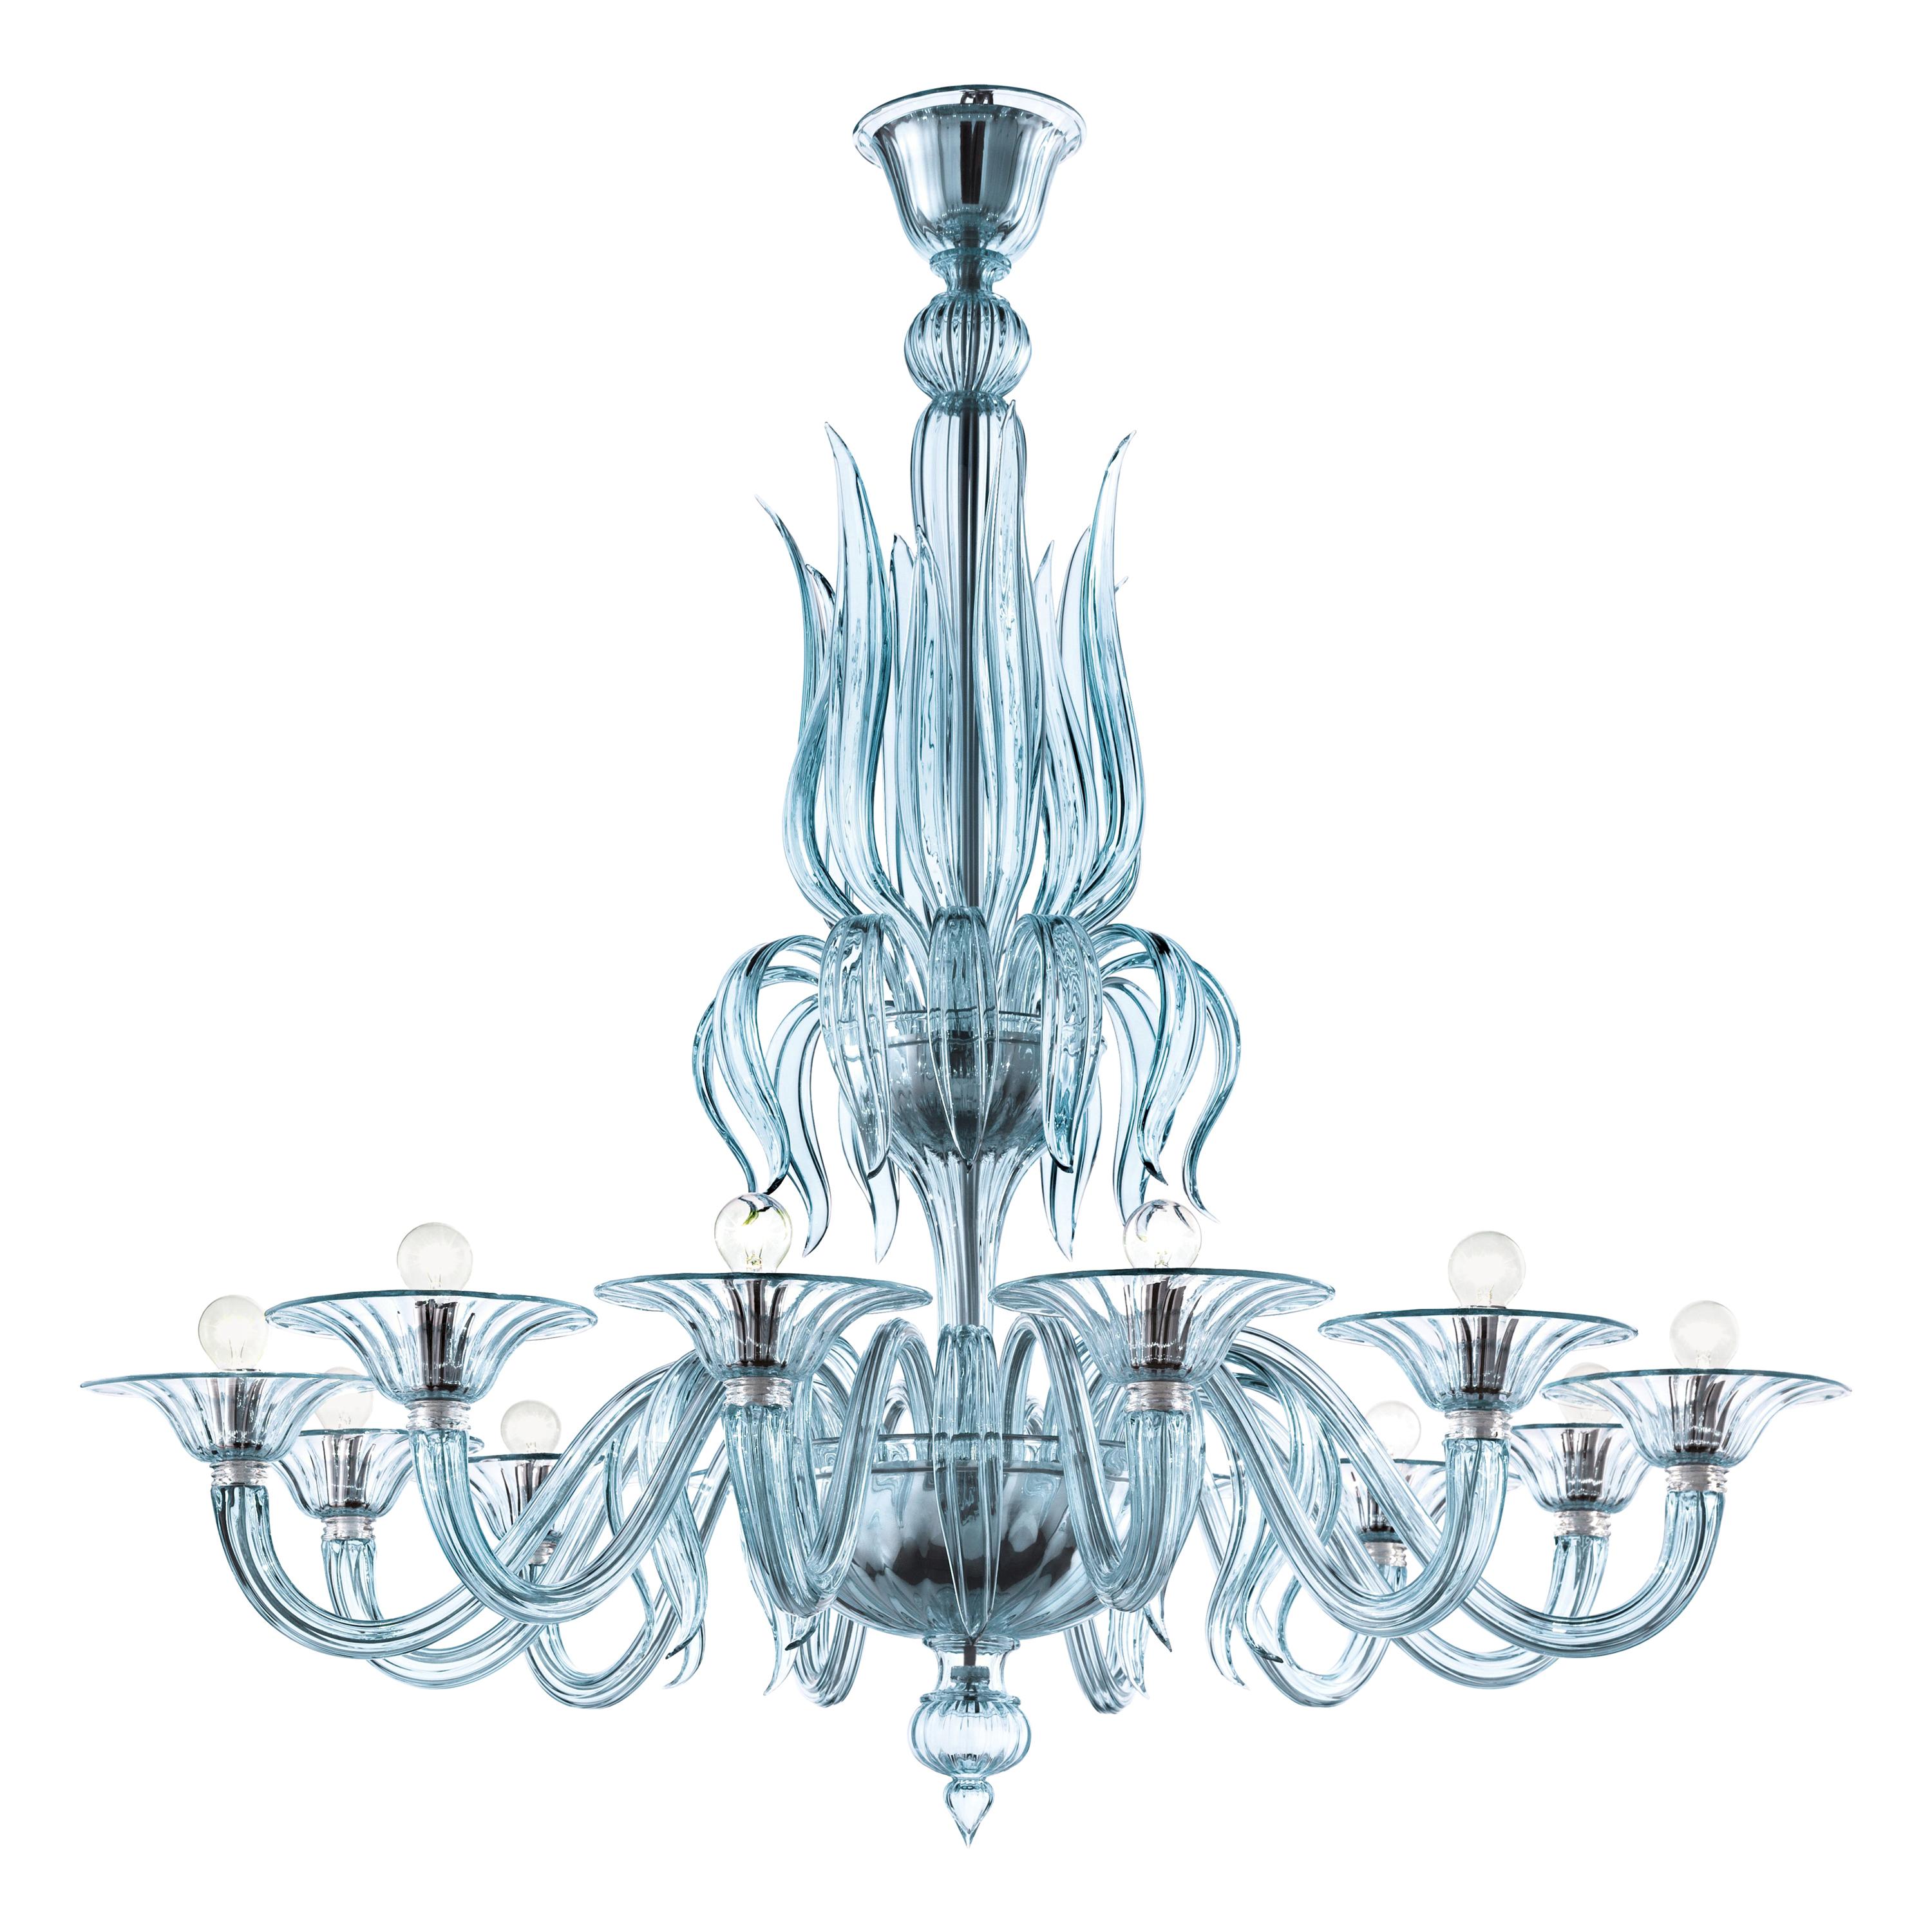 Blue (Aquamarine_AQ) Fauve 5306 12 Chandelier in Glass, by Barovier & Toso